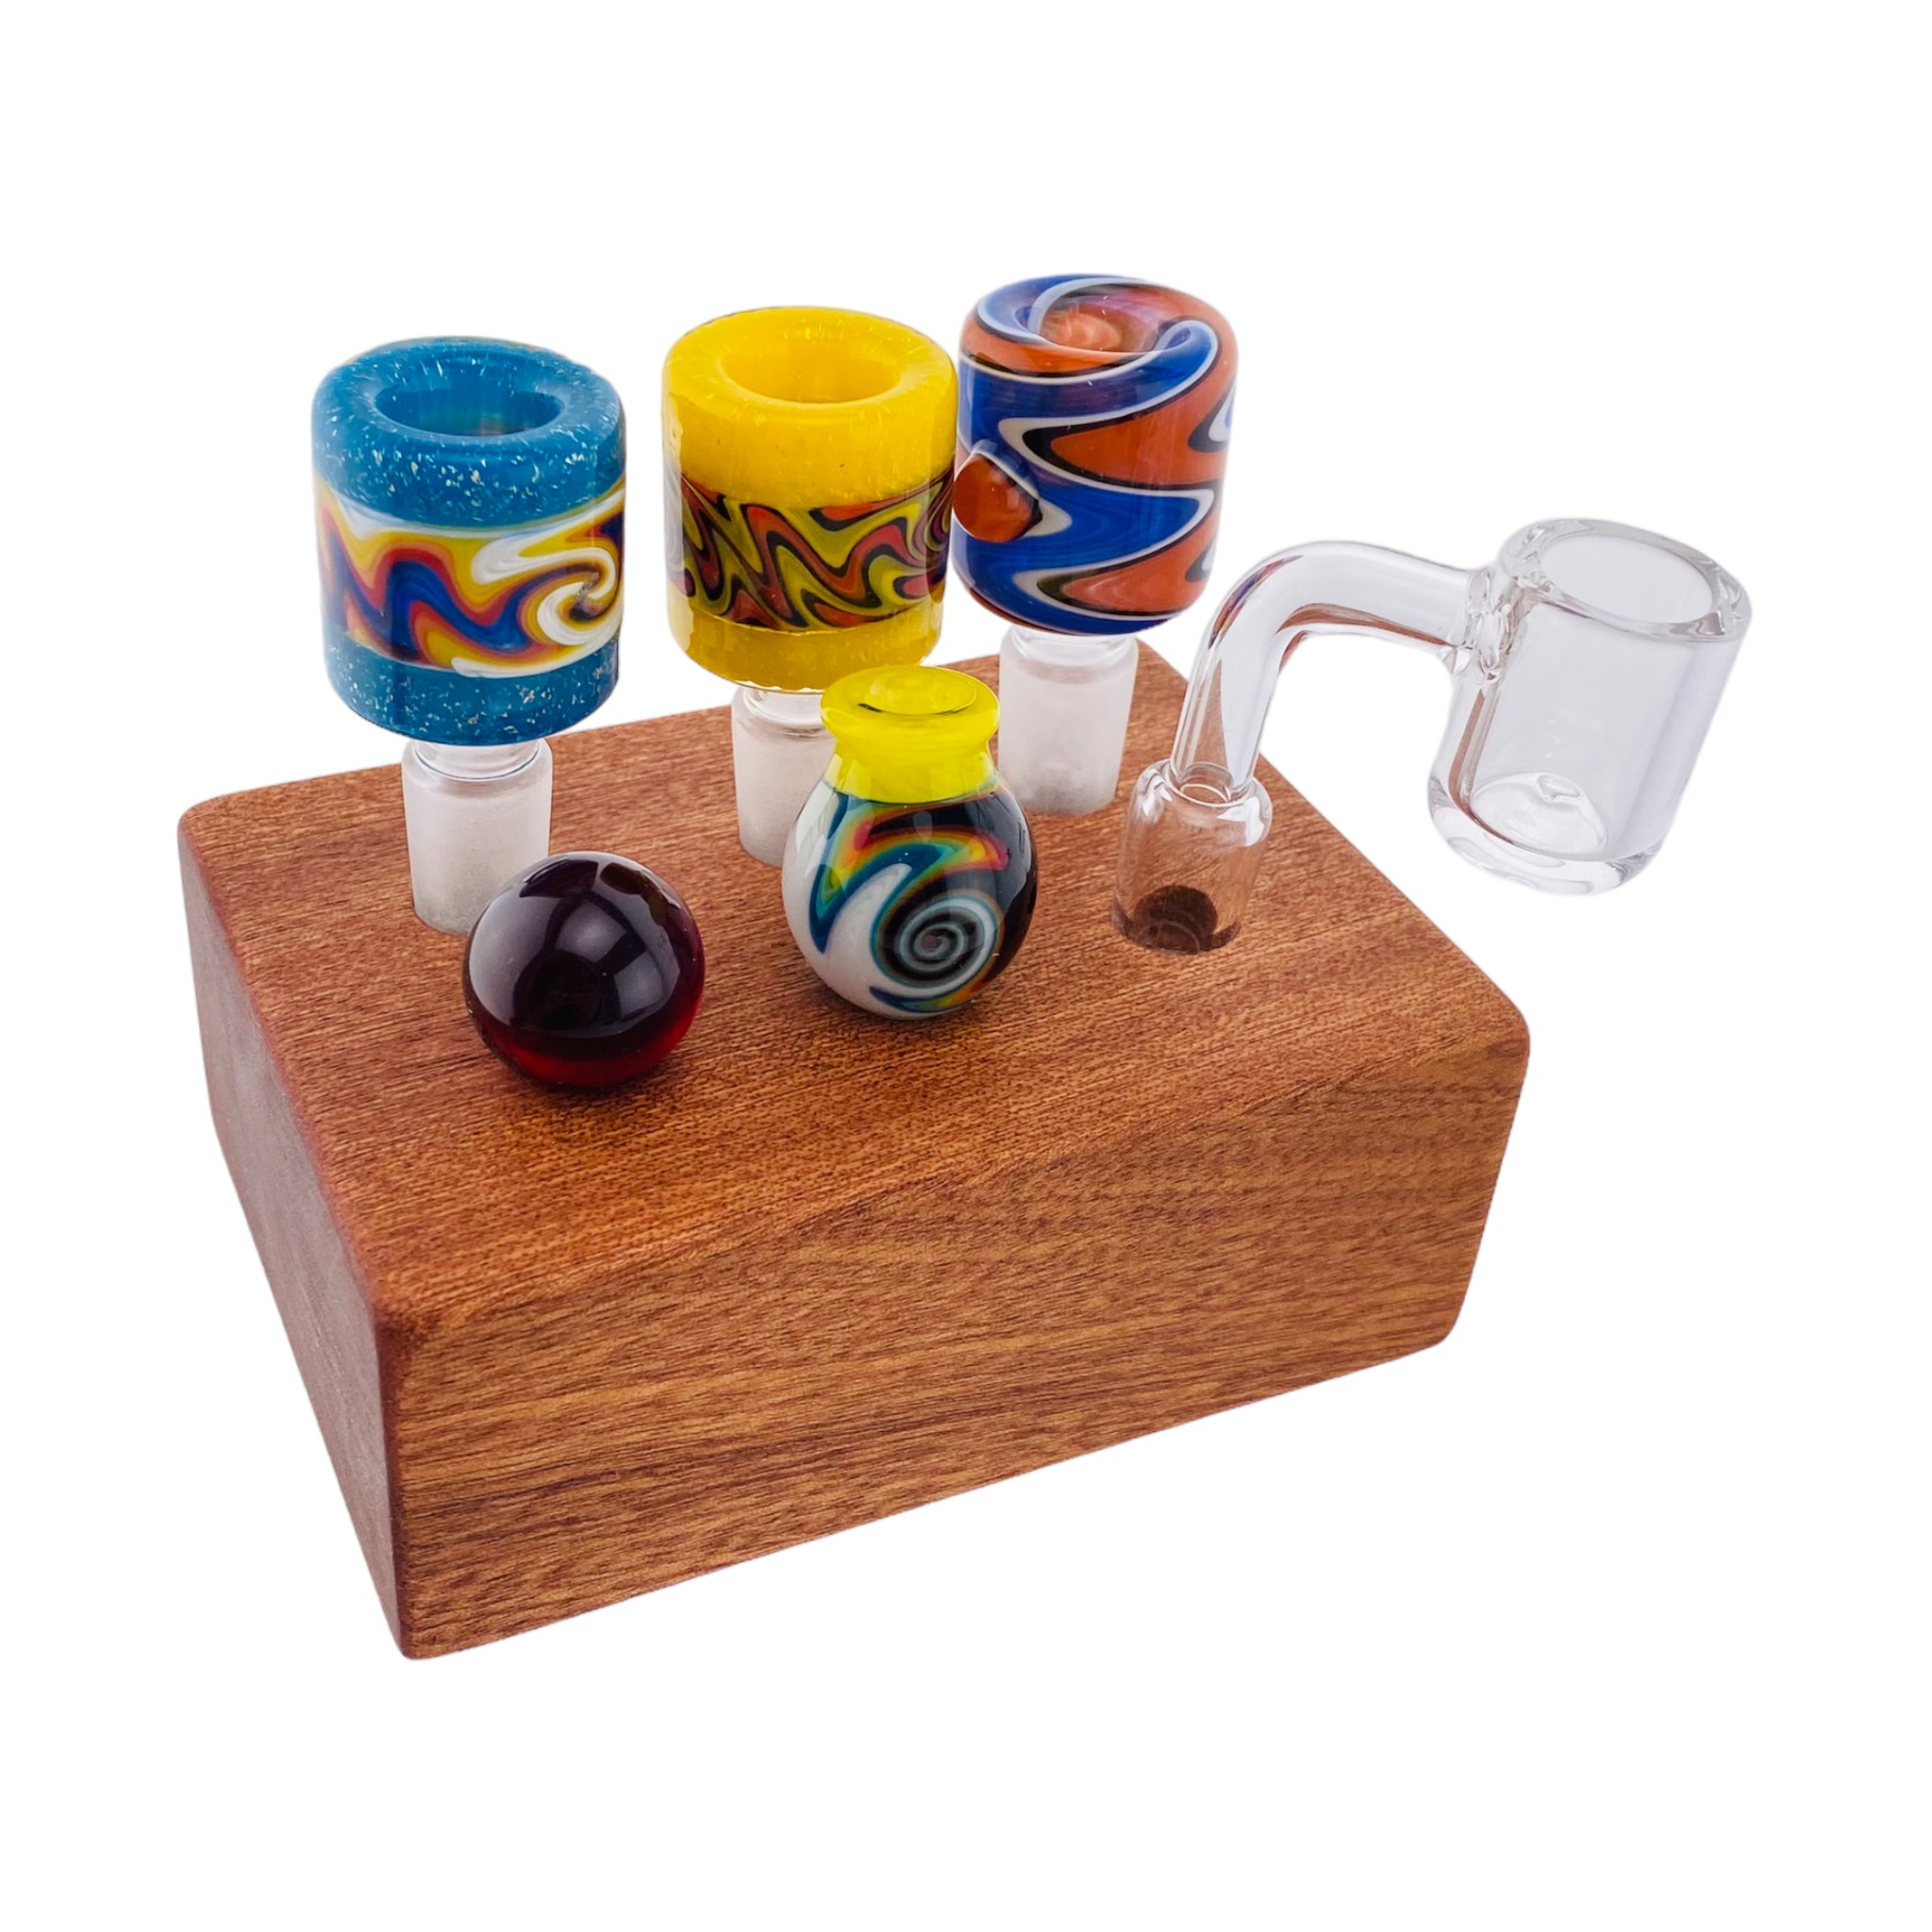 6 Hole Wood Display Stand Holder For 14mm Bong Bowl Pieces Or Quartz Bangers - Mahogany Block